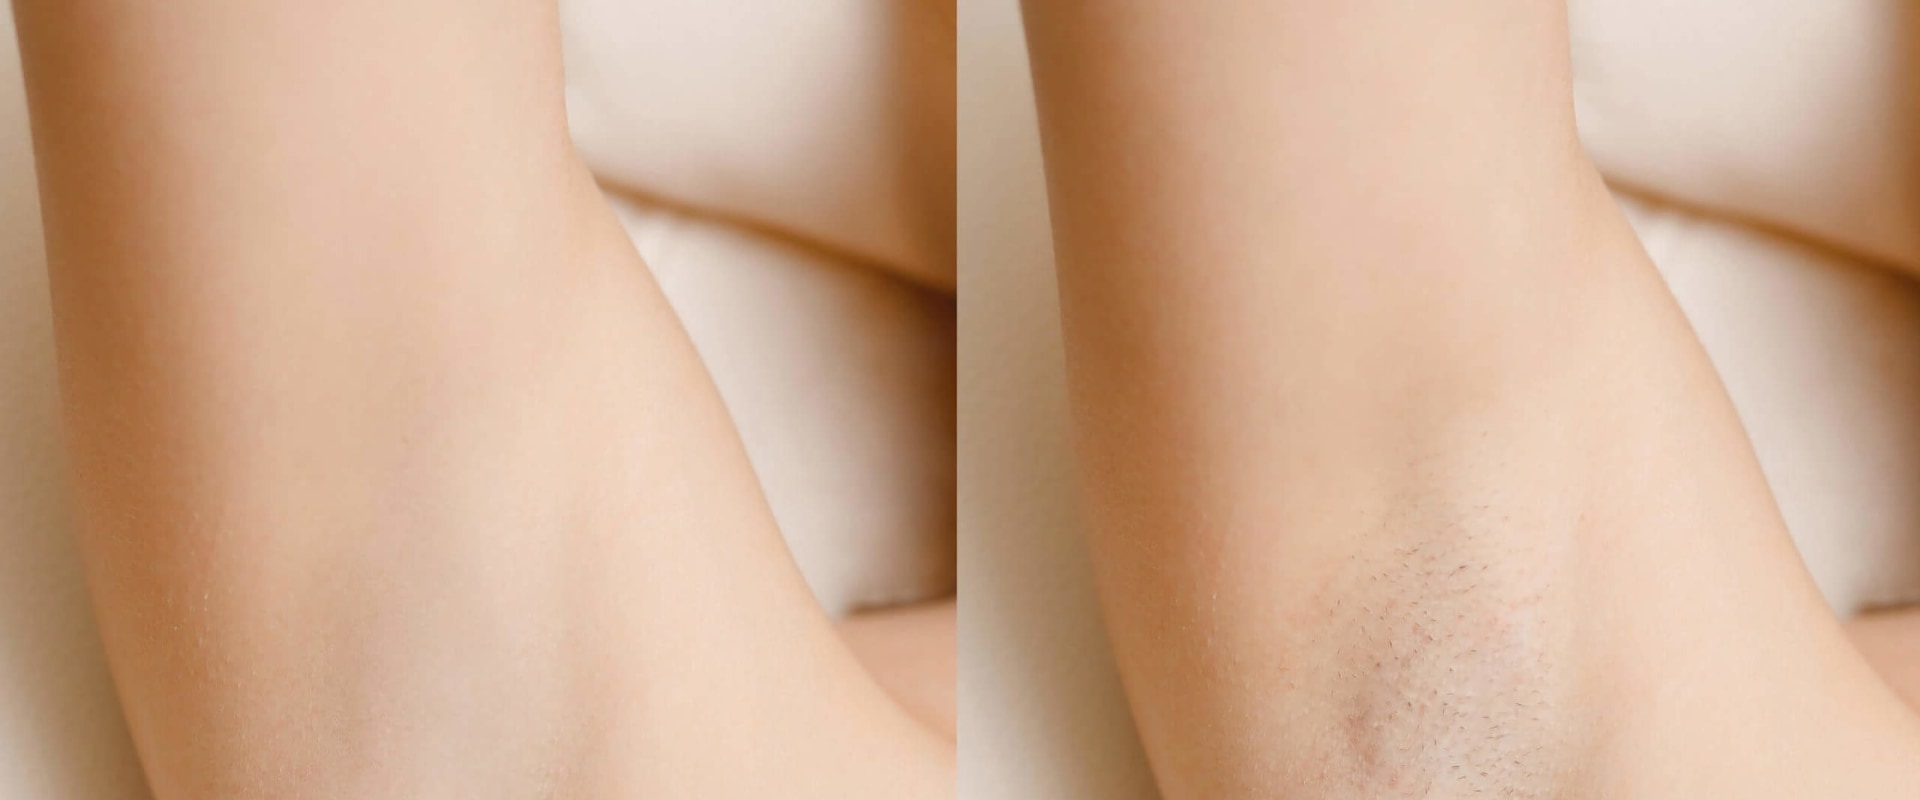 How Much Does Laser Hair Removal Cost for the Underarms?